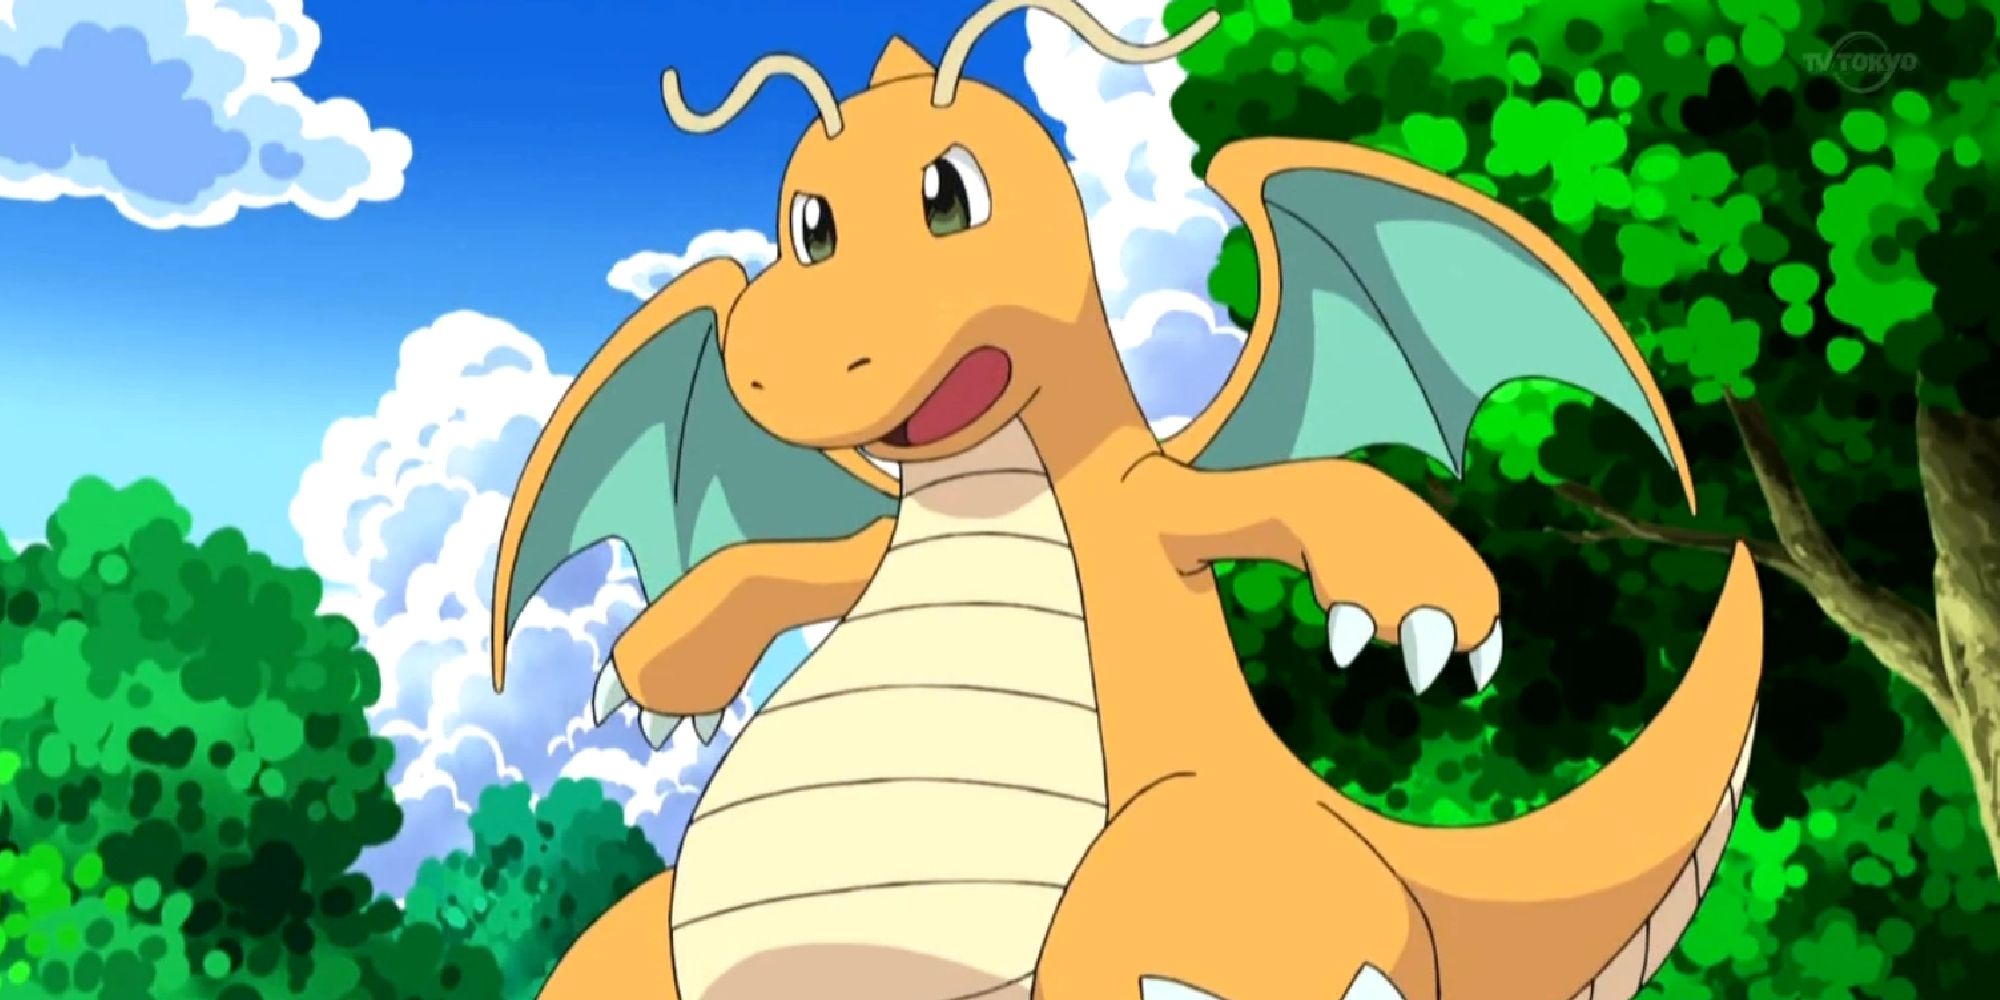 Dragonite in a forest in the anime